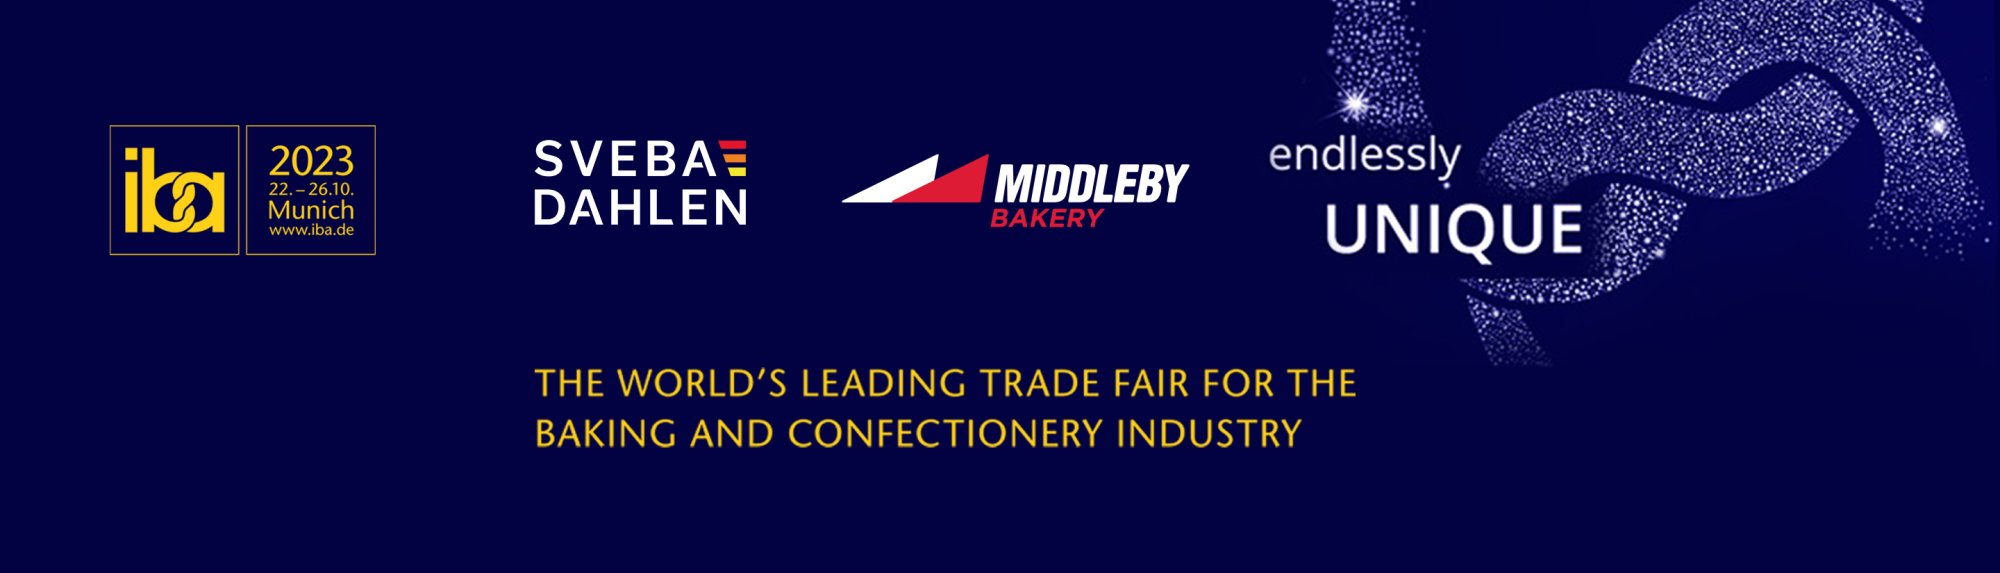 Sveba Dahlen iba 2023 munich find us in the middleby booth Hall B1 Stand 150